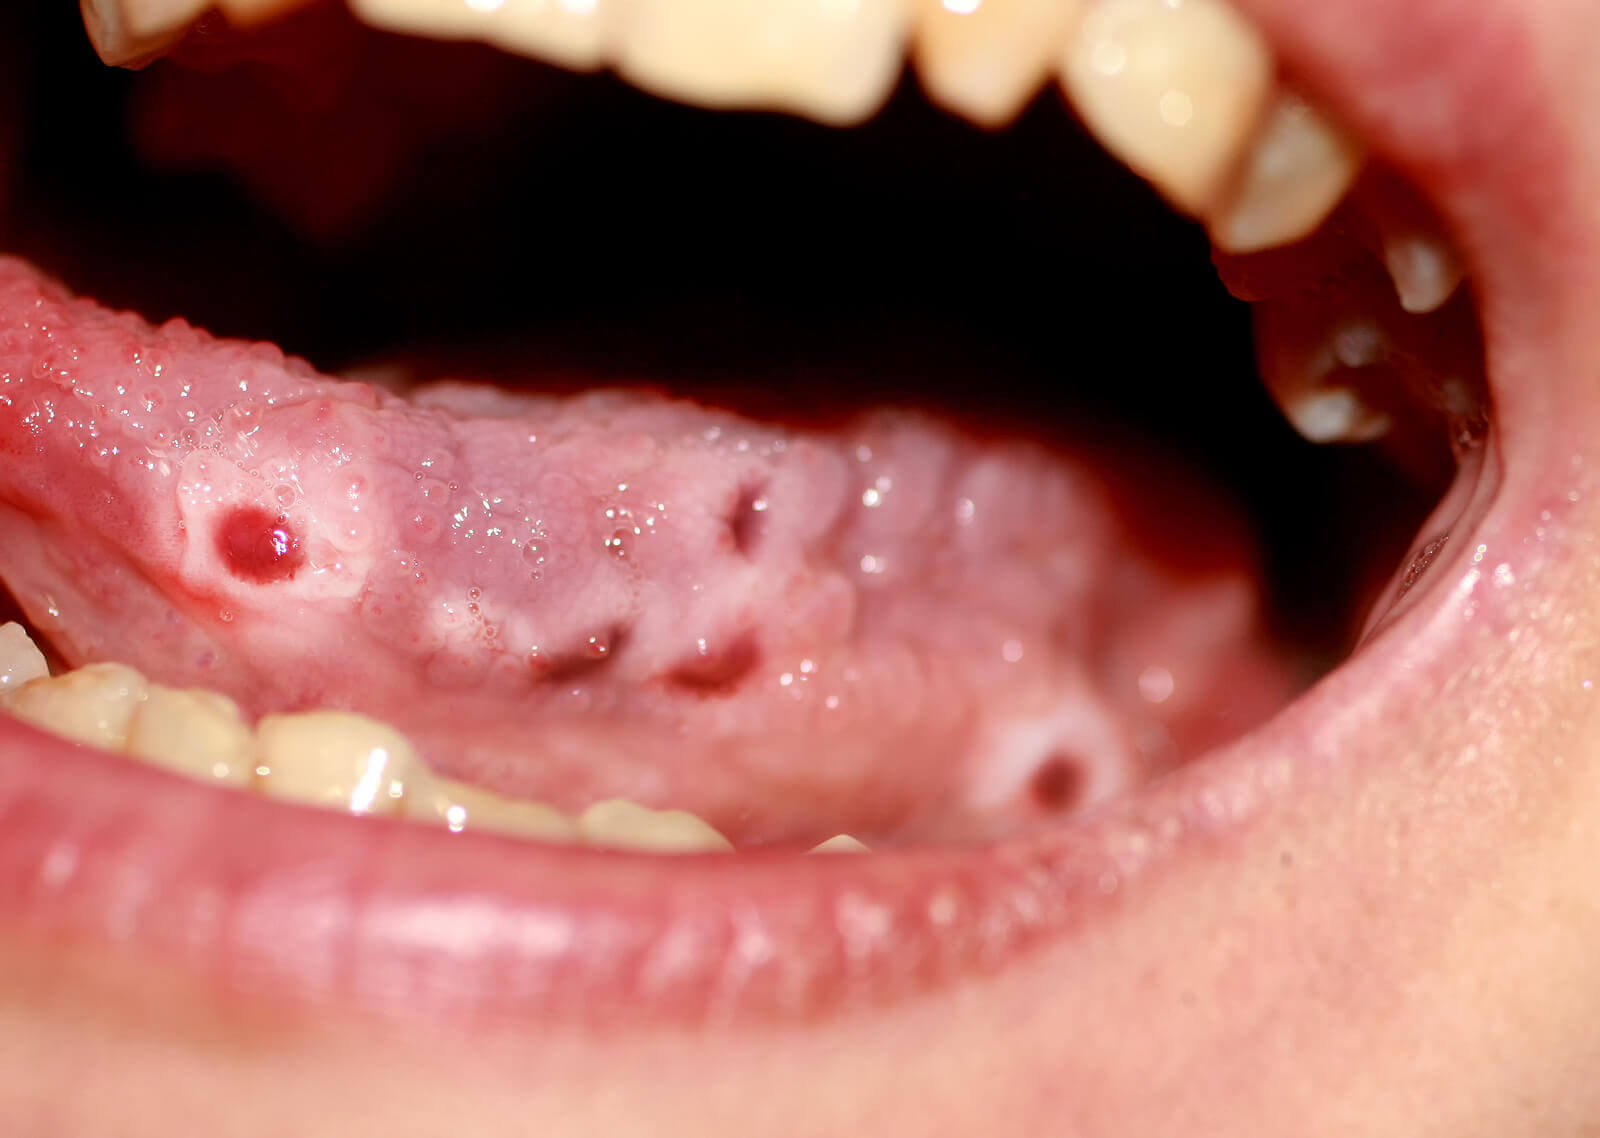 Cold sores on a tongue.